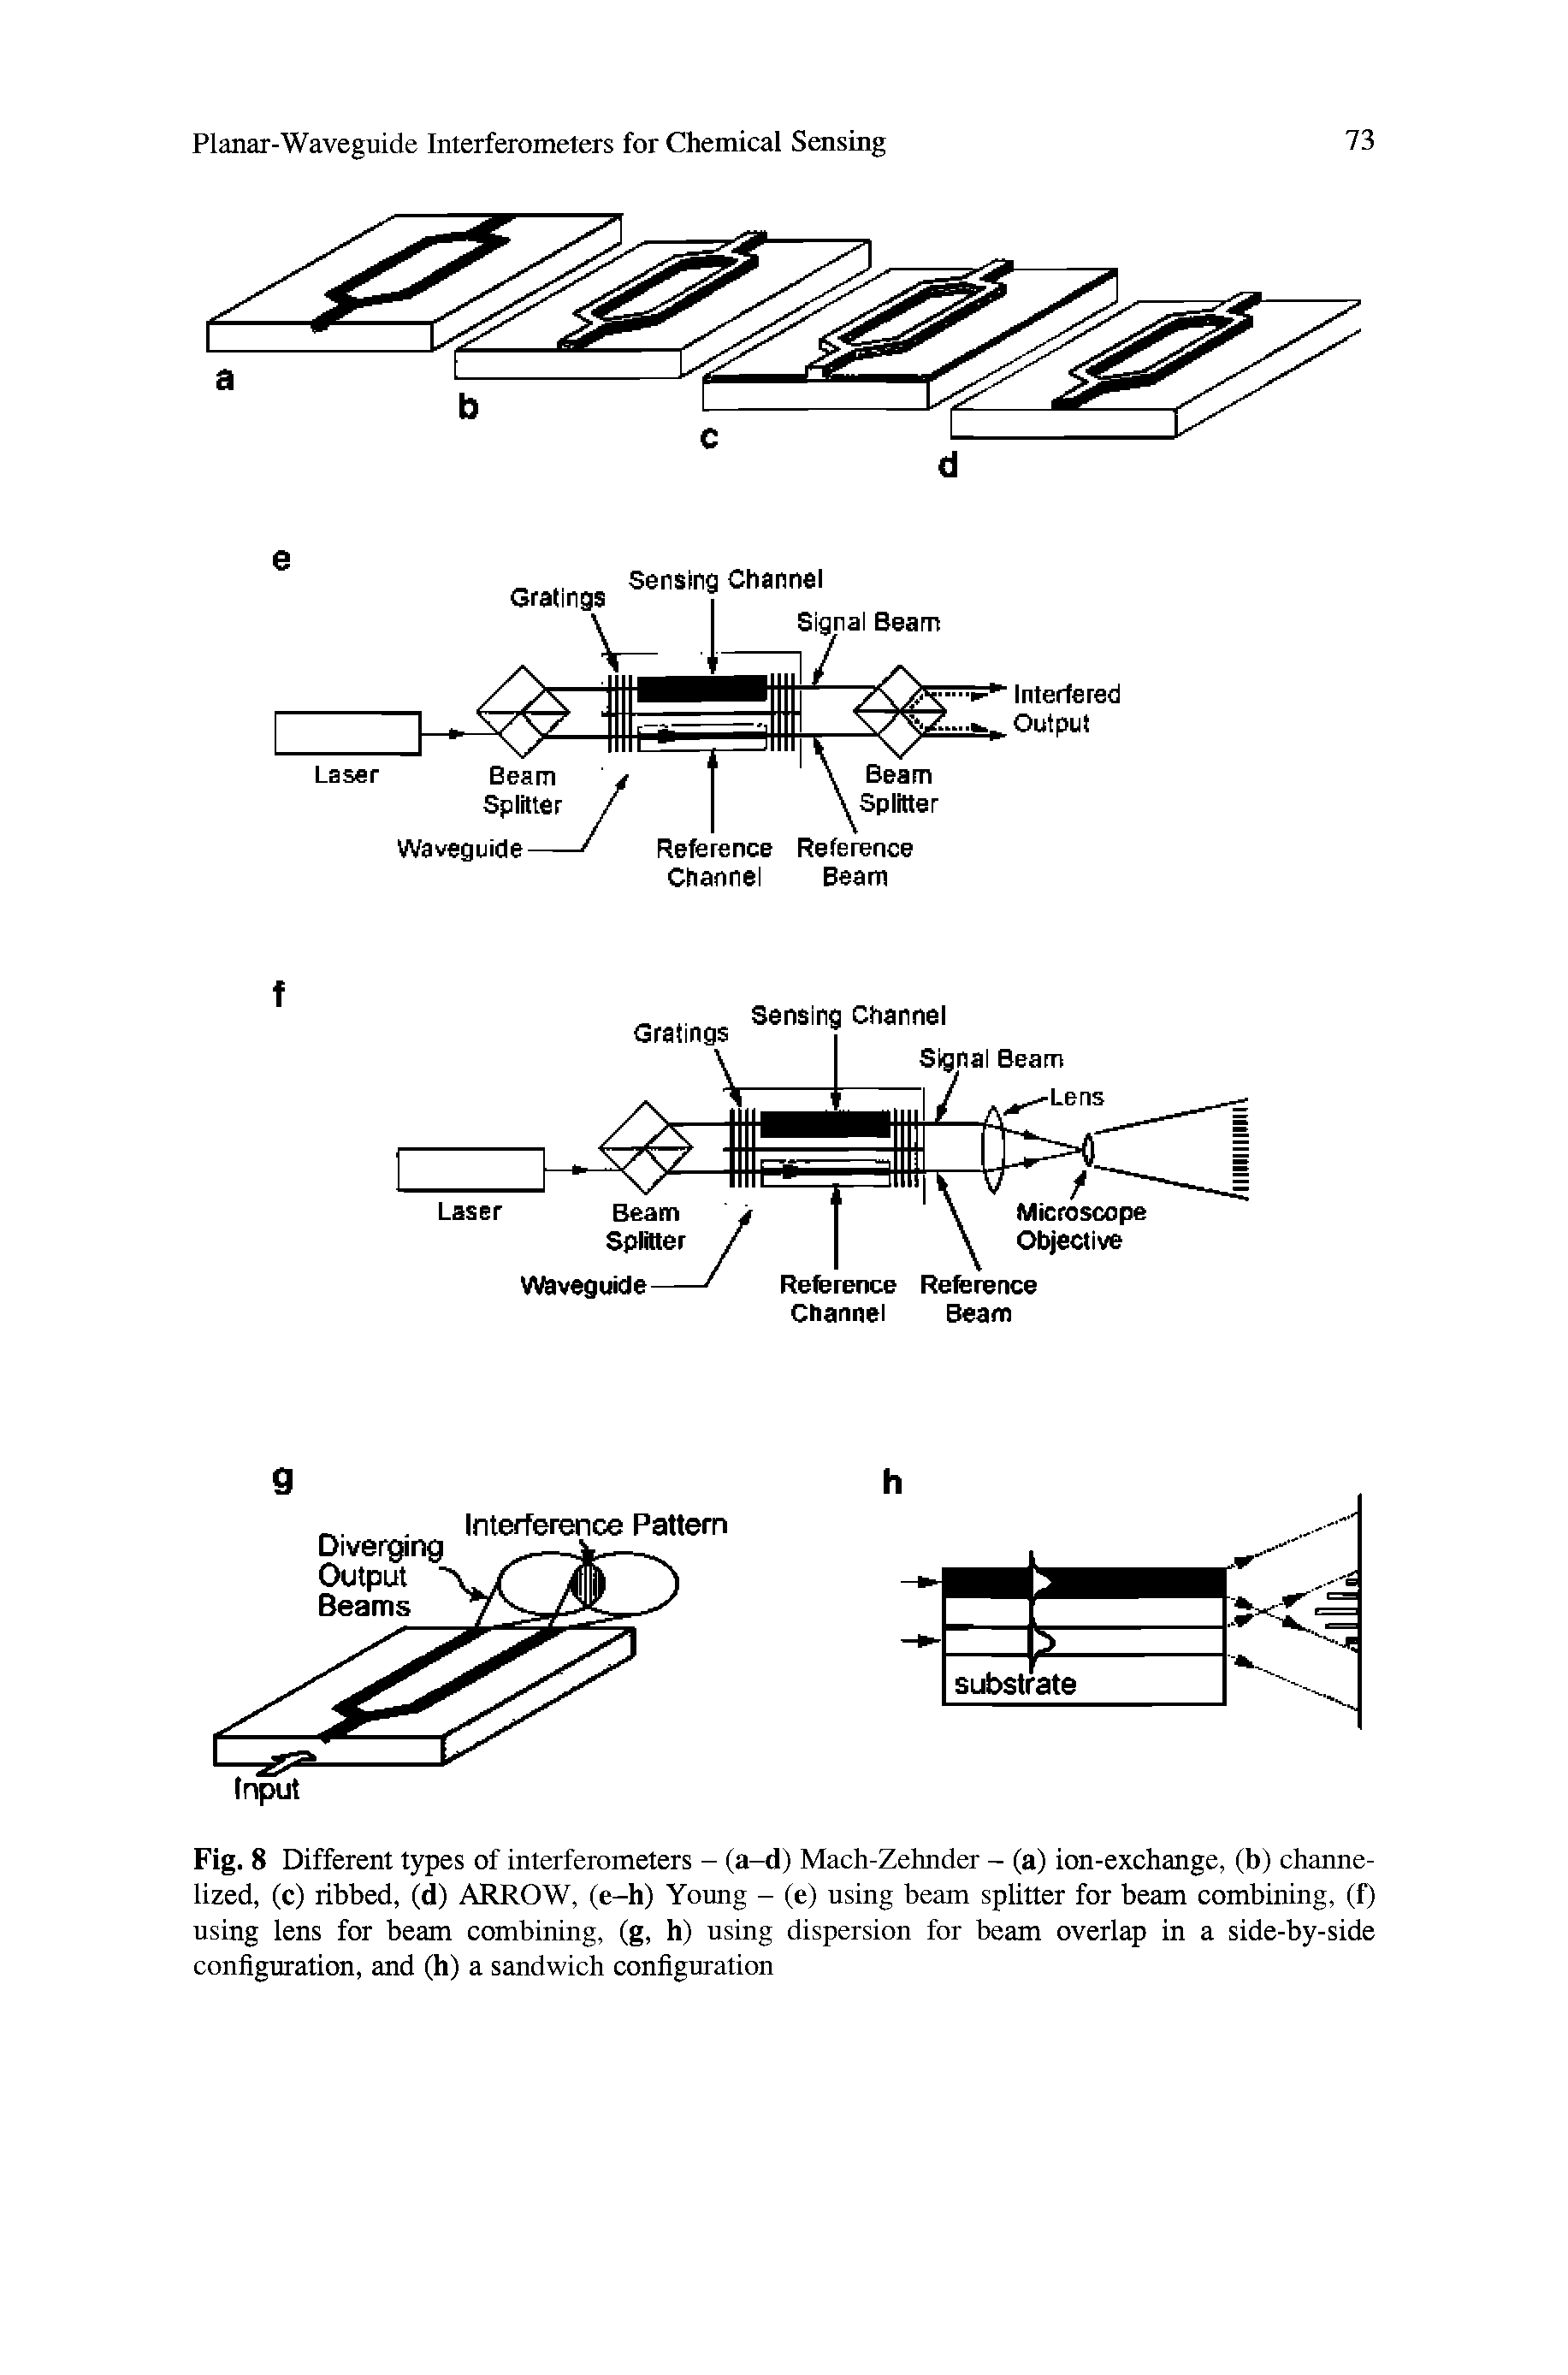 Fig. 8 Different types of interferometers - (a-d) Mach-Zehnder - (a) ion-exchange, (b) channelized, (c) ribbed, (d) ARROW, (e-h) Young - (e) using beam splitter for beam combining, (f) using lens for beam combining, (g, h) using dispersion for beam overlap in a side-by-side configuration, and (h) a sandwich configuration...